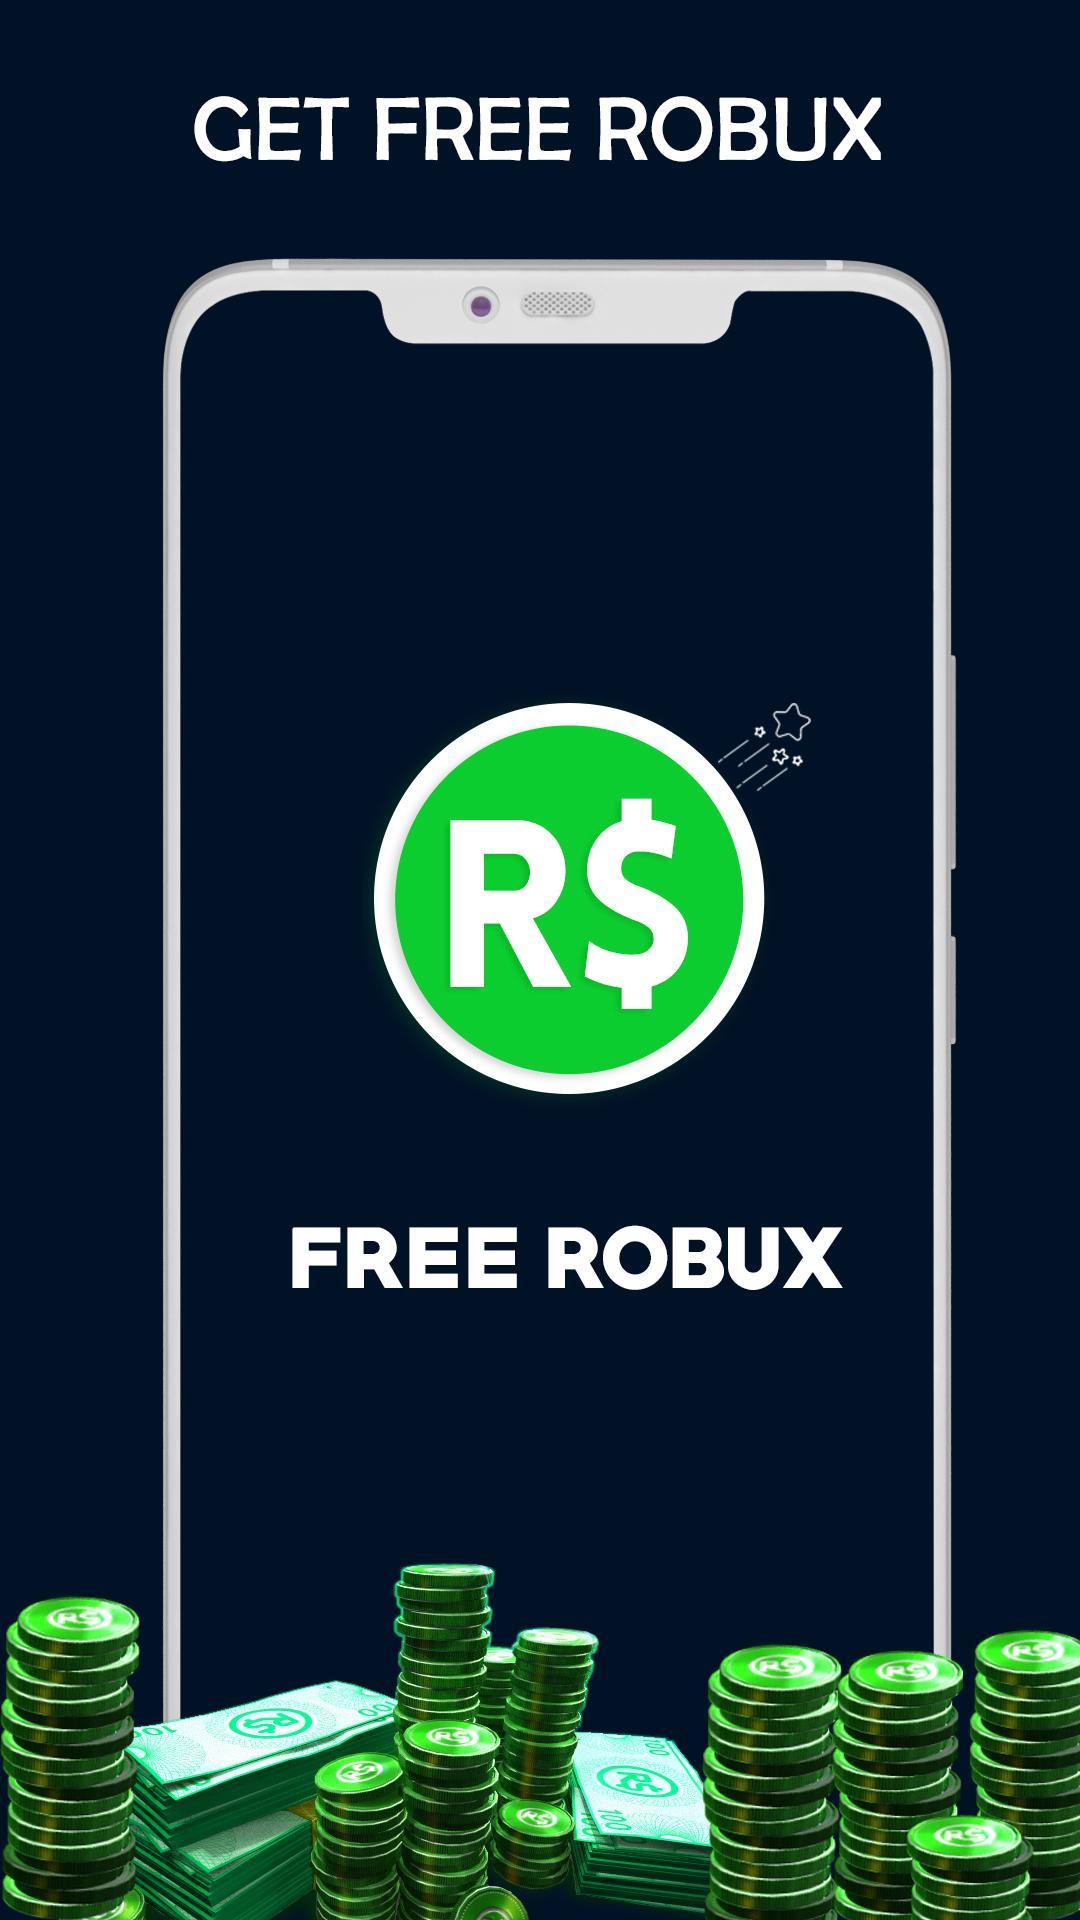 Win Daily Free Robux Get Free Robux 2k19 For Android Apk Download